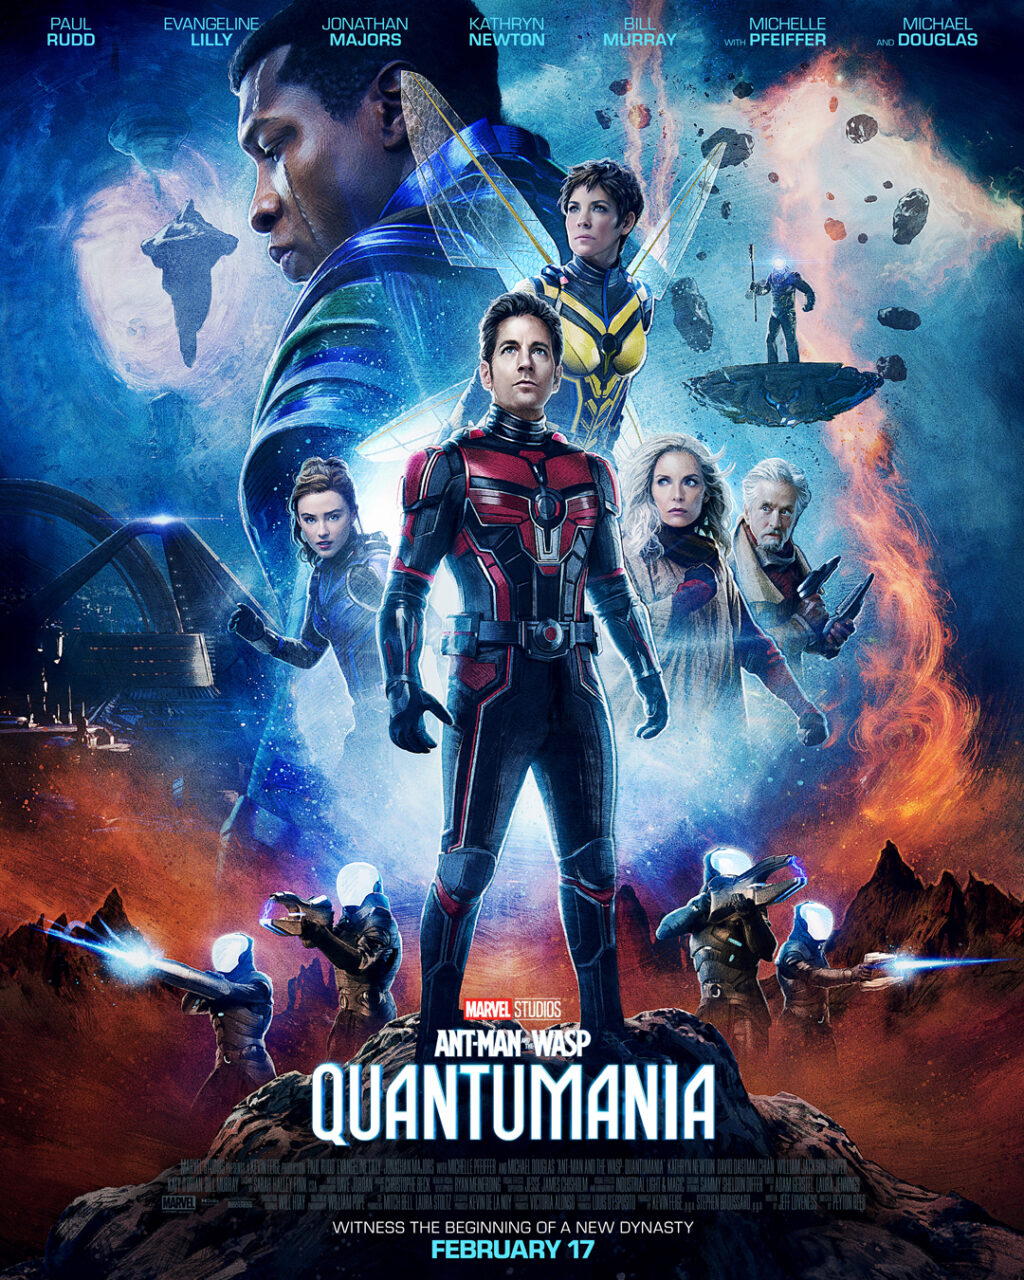 Ant-Man And The Wasp: Quantumania poster (Marvel Studios)